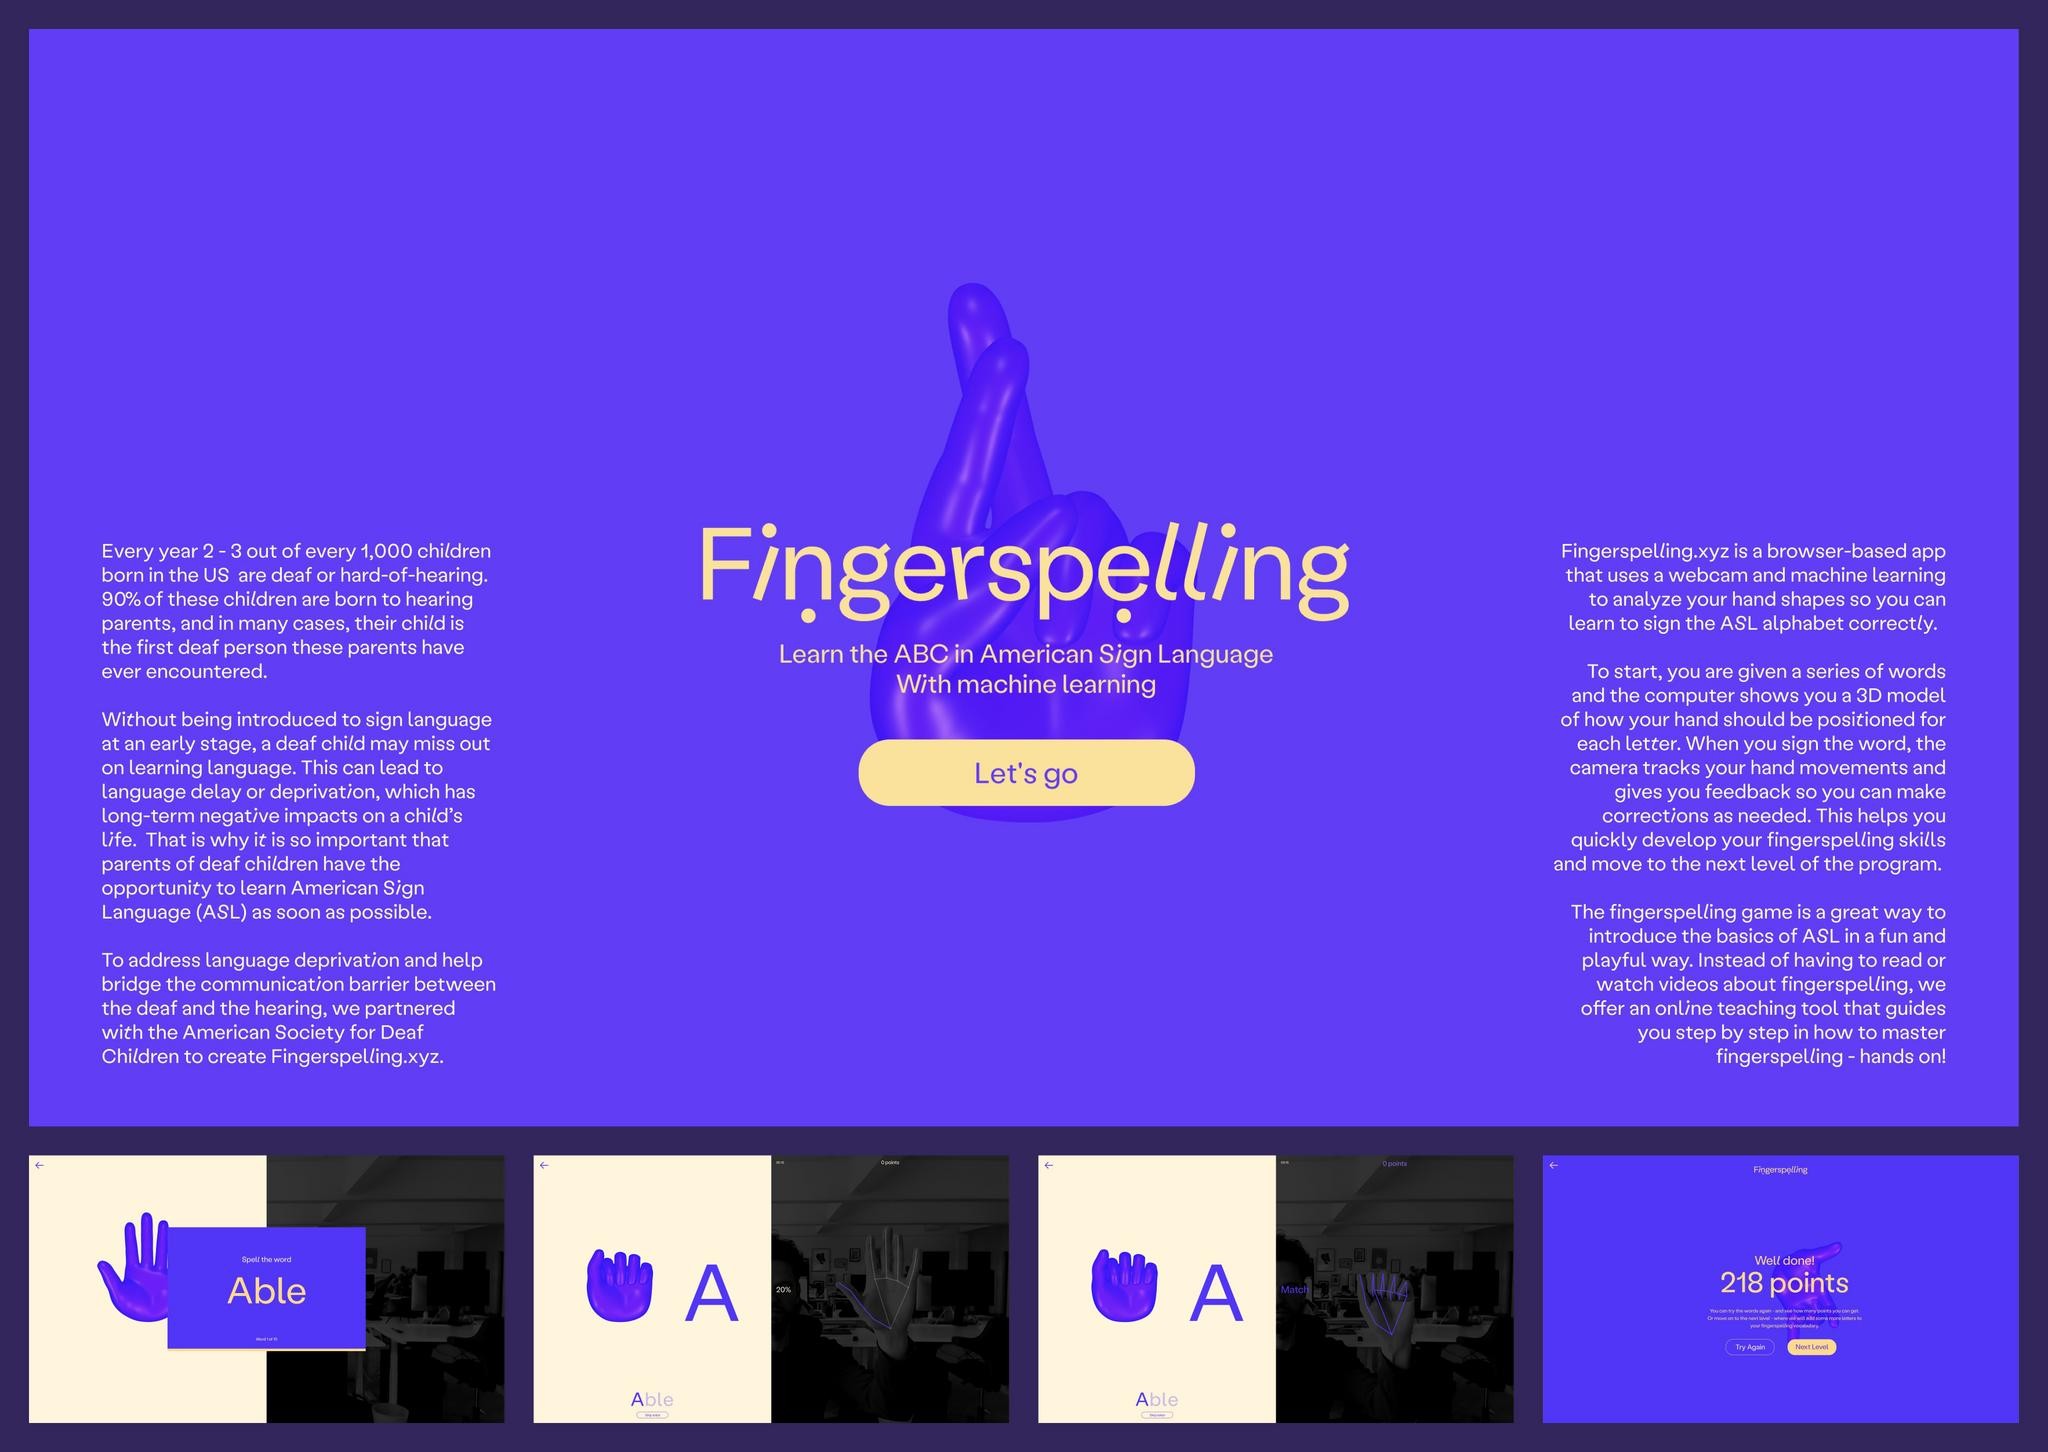 FINGERSPELLING WITH MACHINE LEARNING